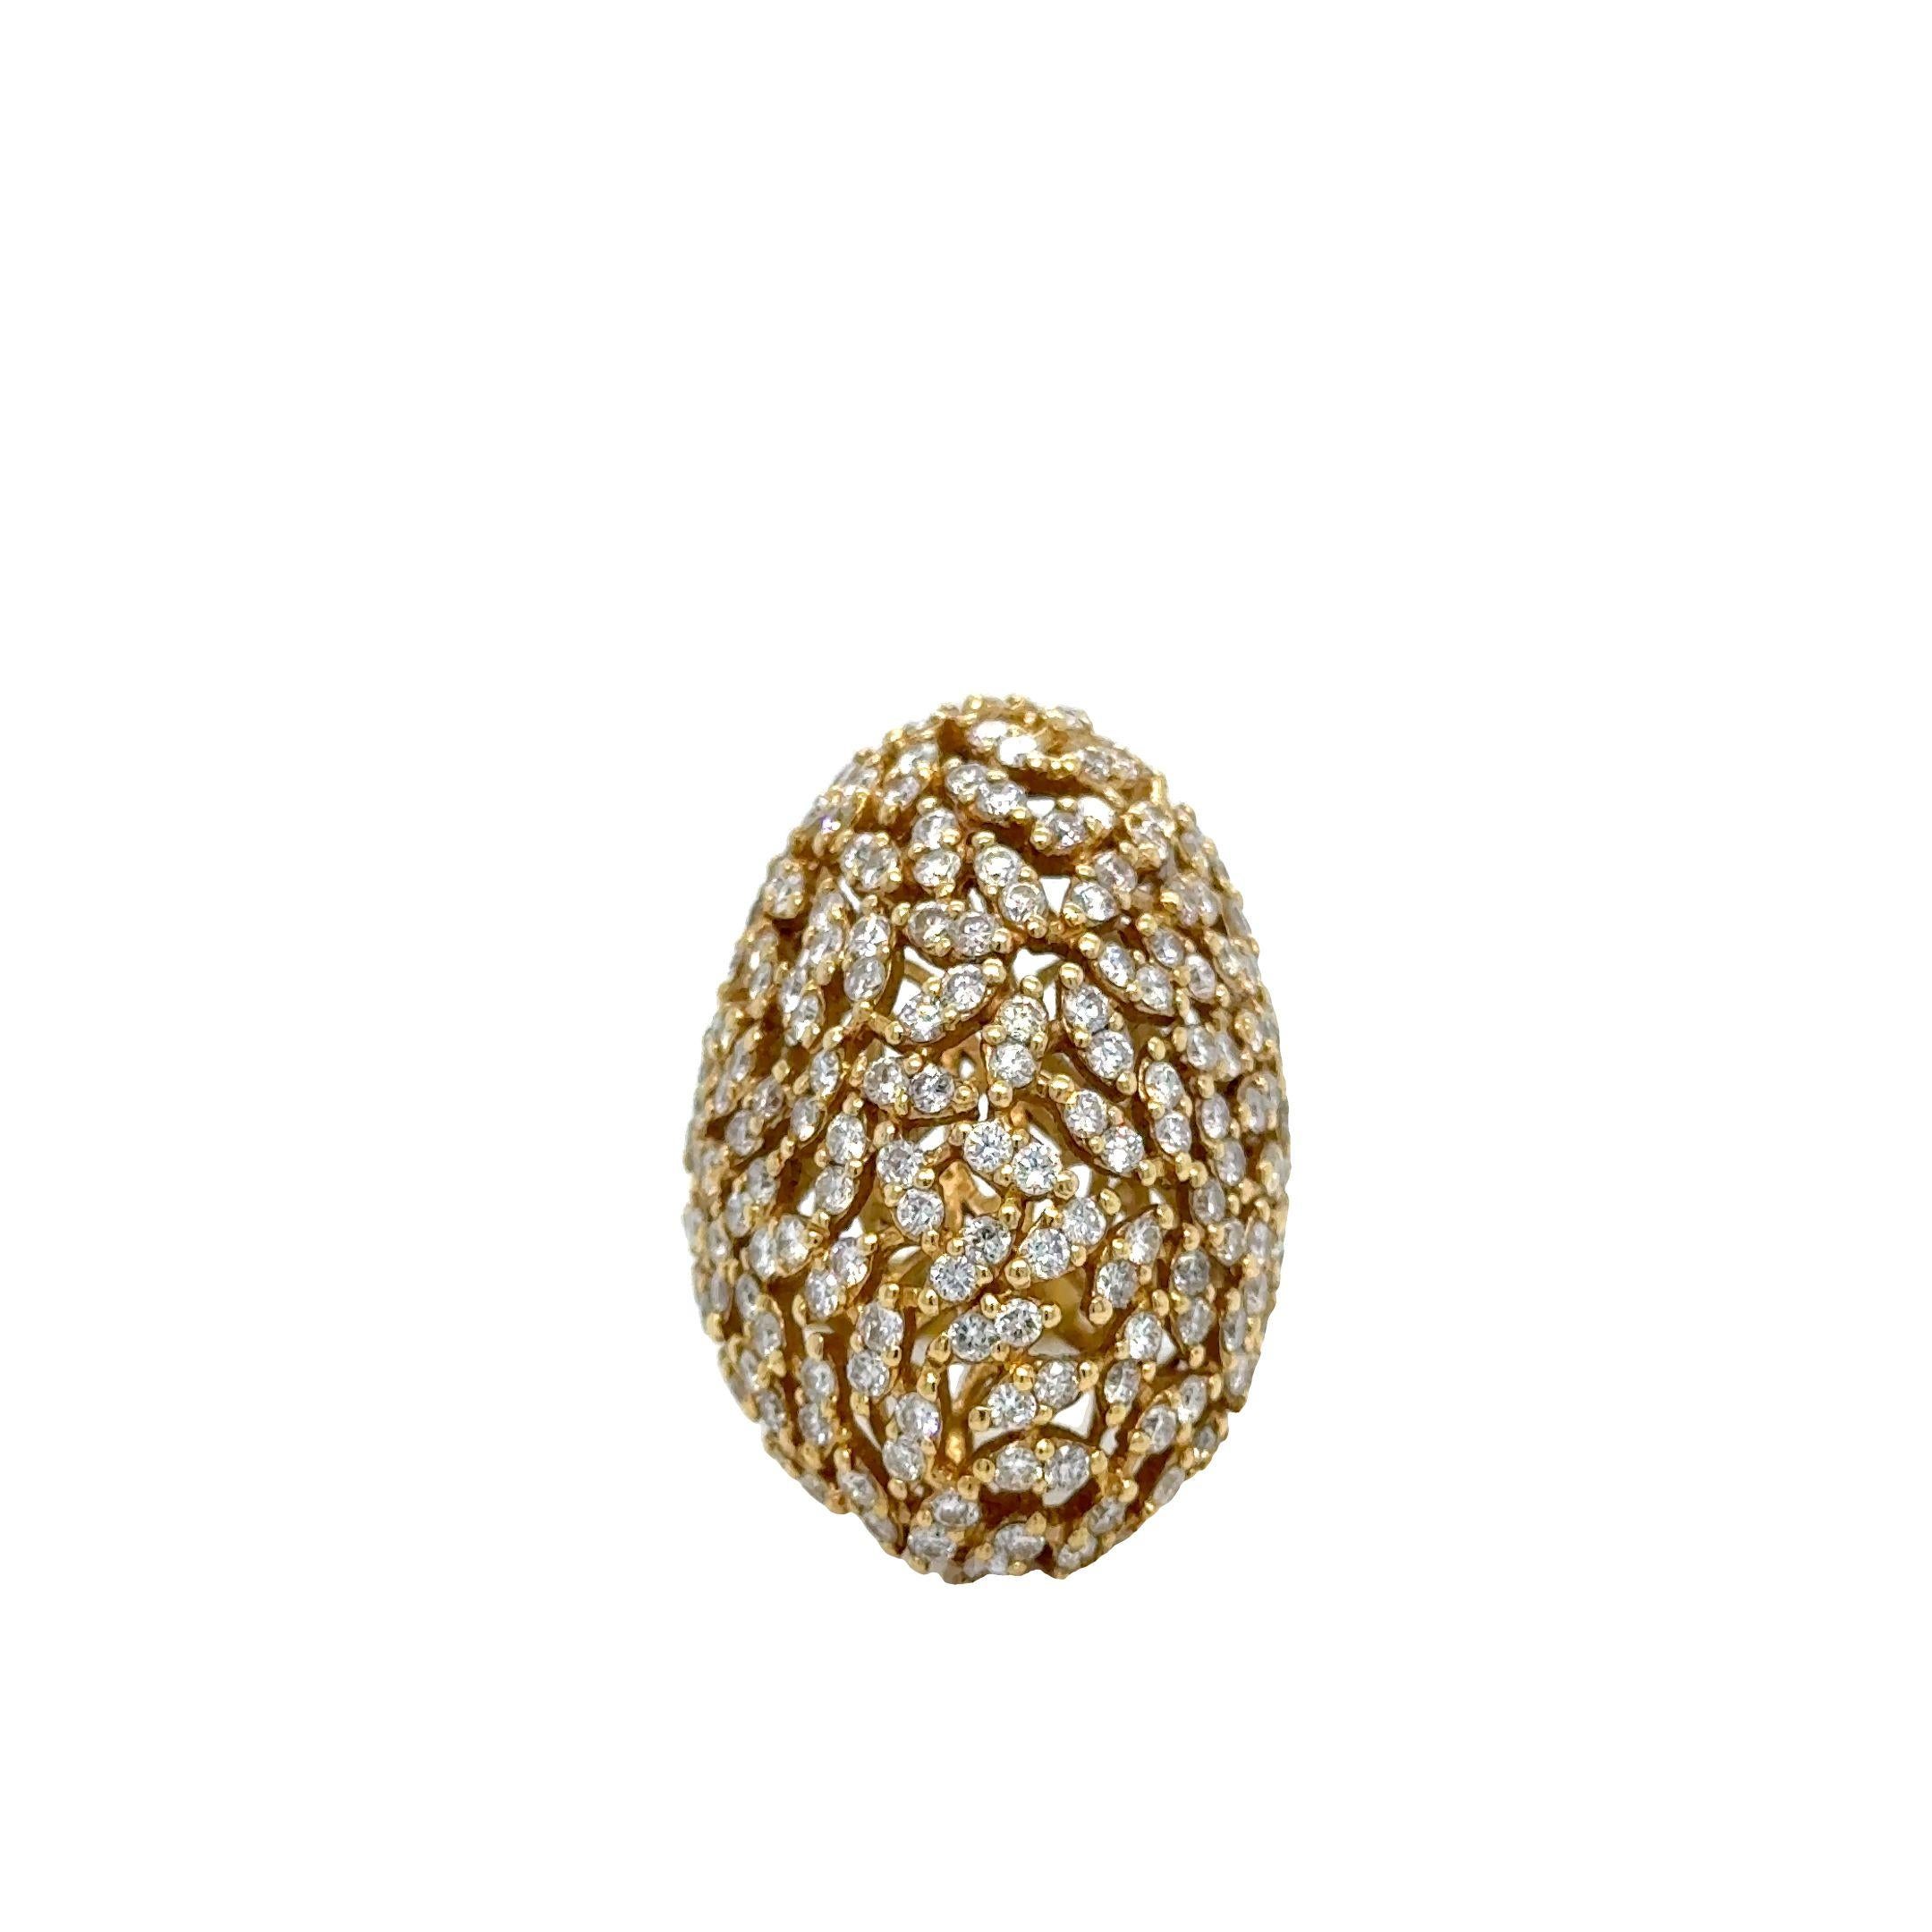 18K Yellow Gold
Diamonds: 3.64ct total weight.
All diamonds are G-H/SI stones.
Width - is approximately 3.5cm/1.38inches.